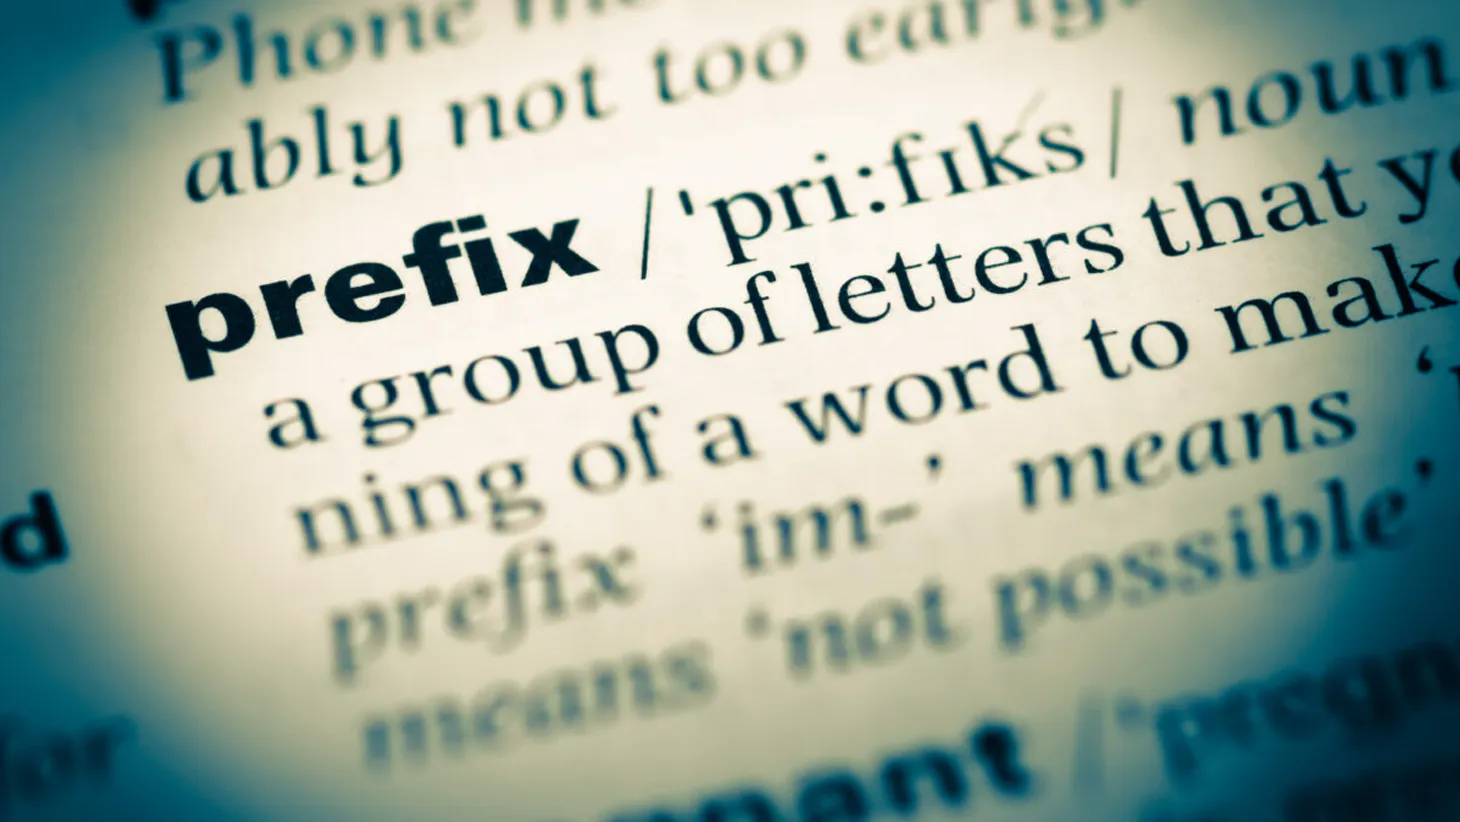 60 Most Common Prefixes List – with Meanings